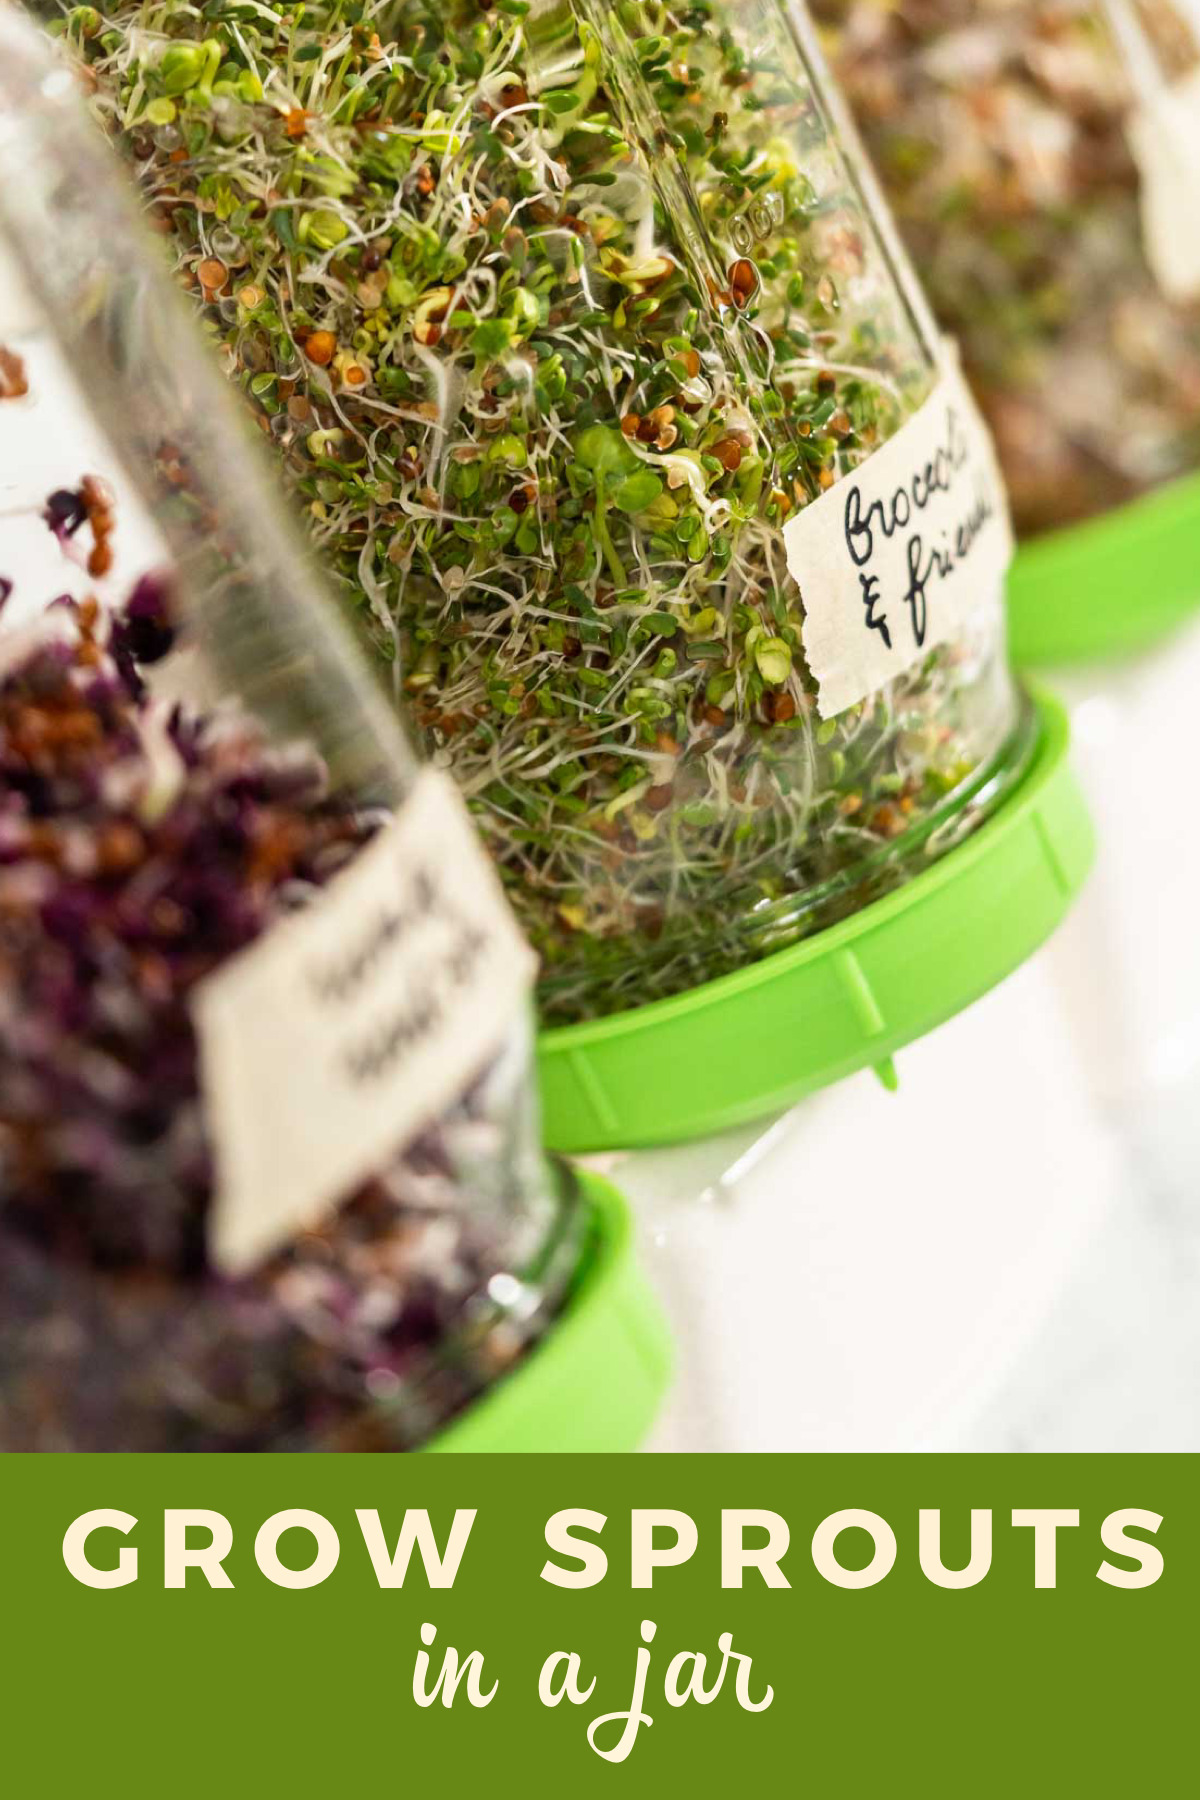 How to Grow Sprouts in a Jar